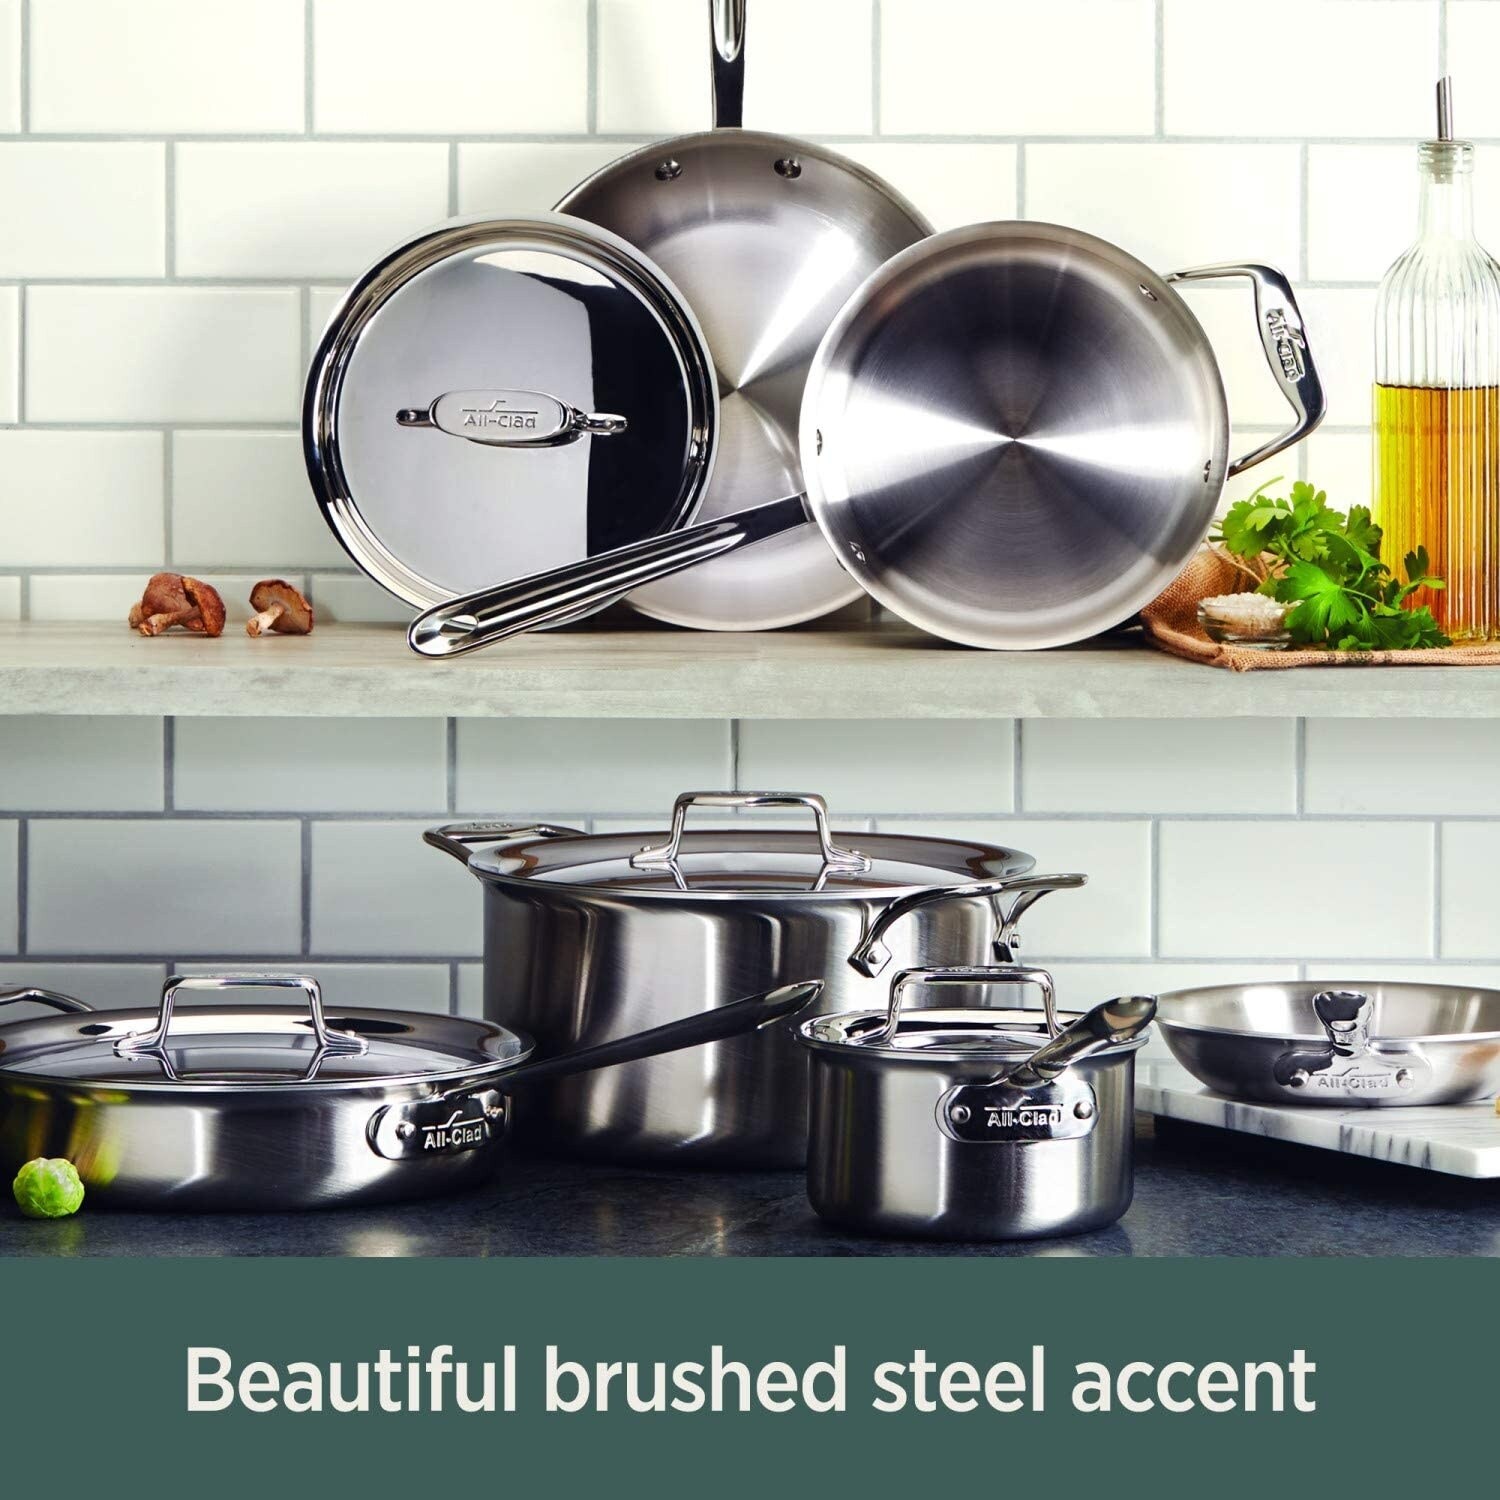 https://ak1.ostkcdn.com/images/products/is/images/direct/5eb3835e03a2e41b3315e647878e793857478d07/All-Clad-D5-5-Ply-Brushed-Stainless-Steel-Cookware-Set-%2810-Piece%29.jpg